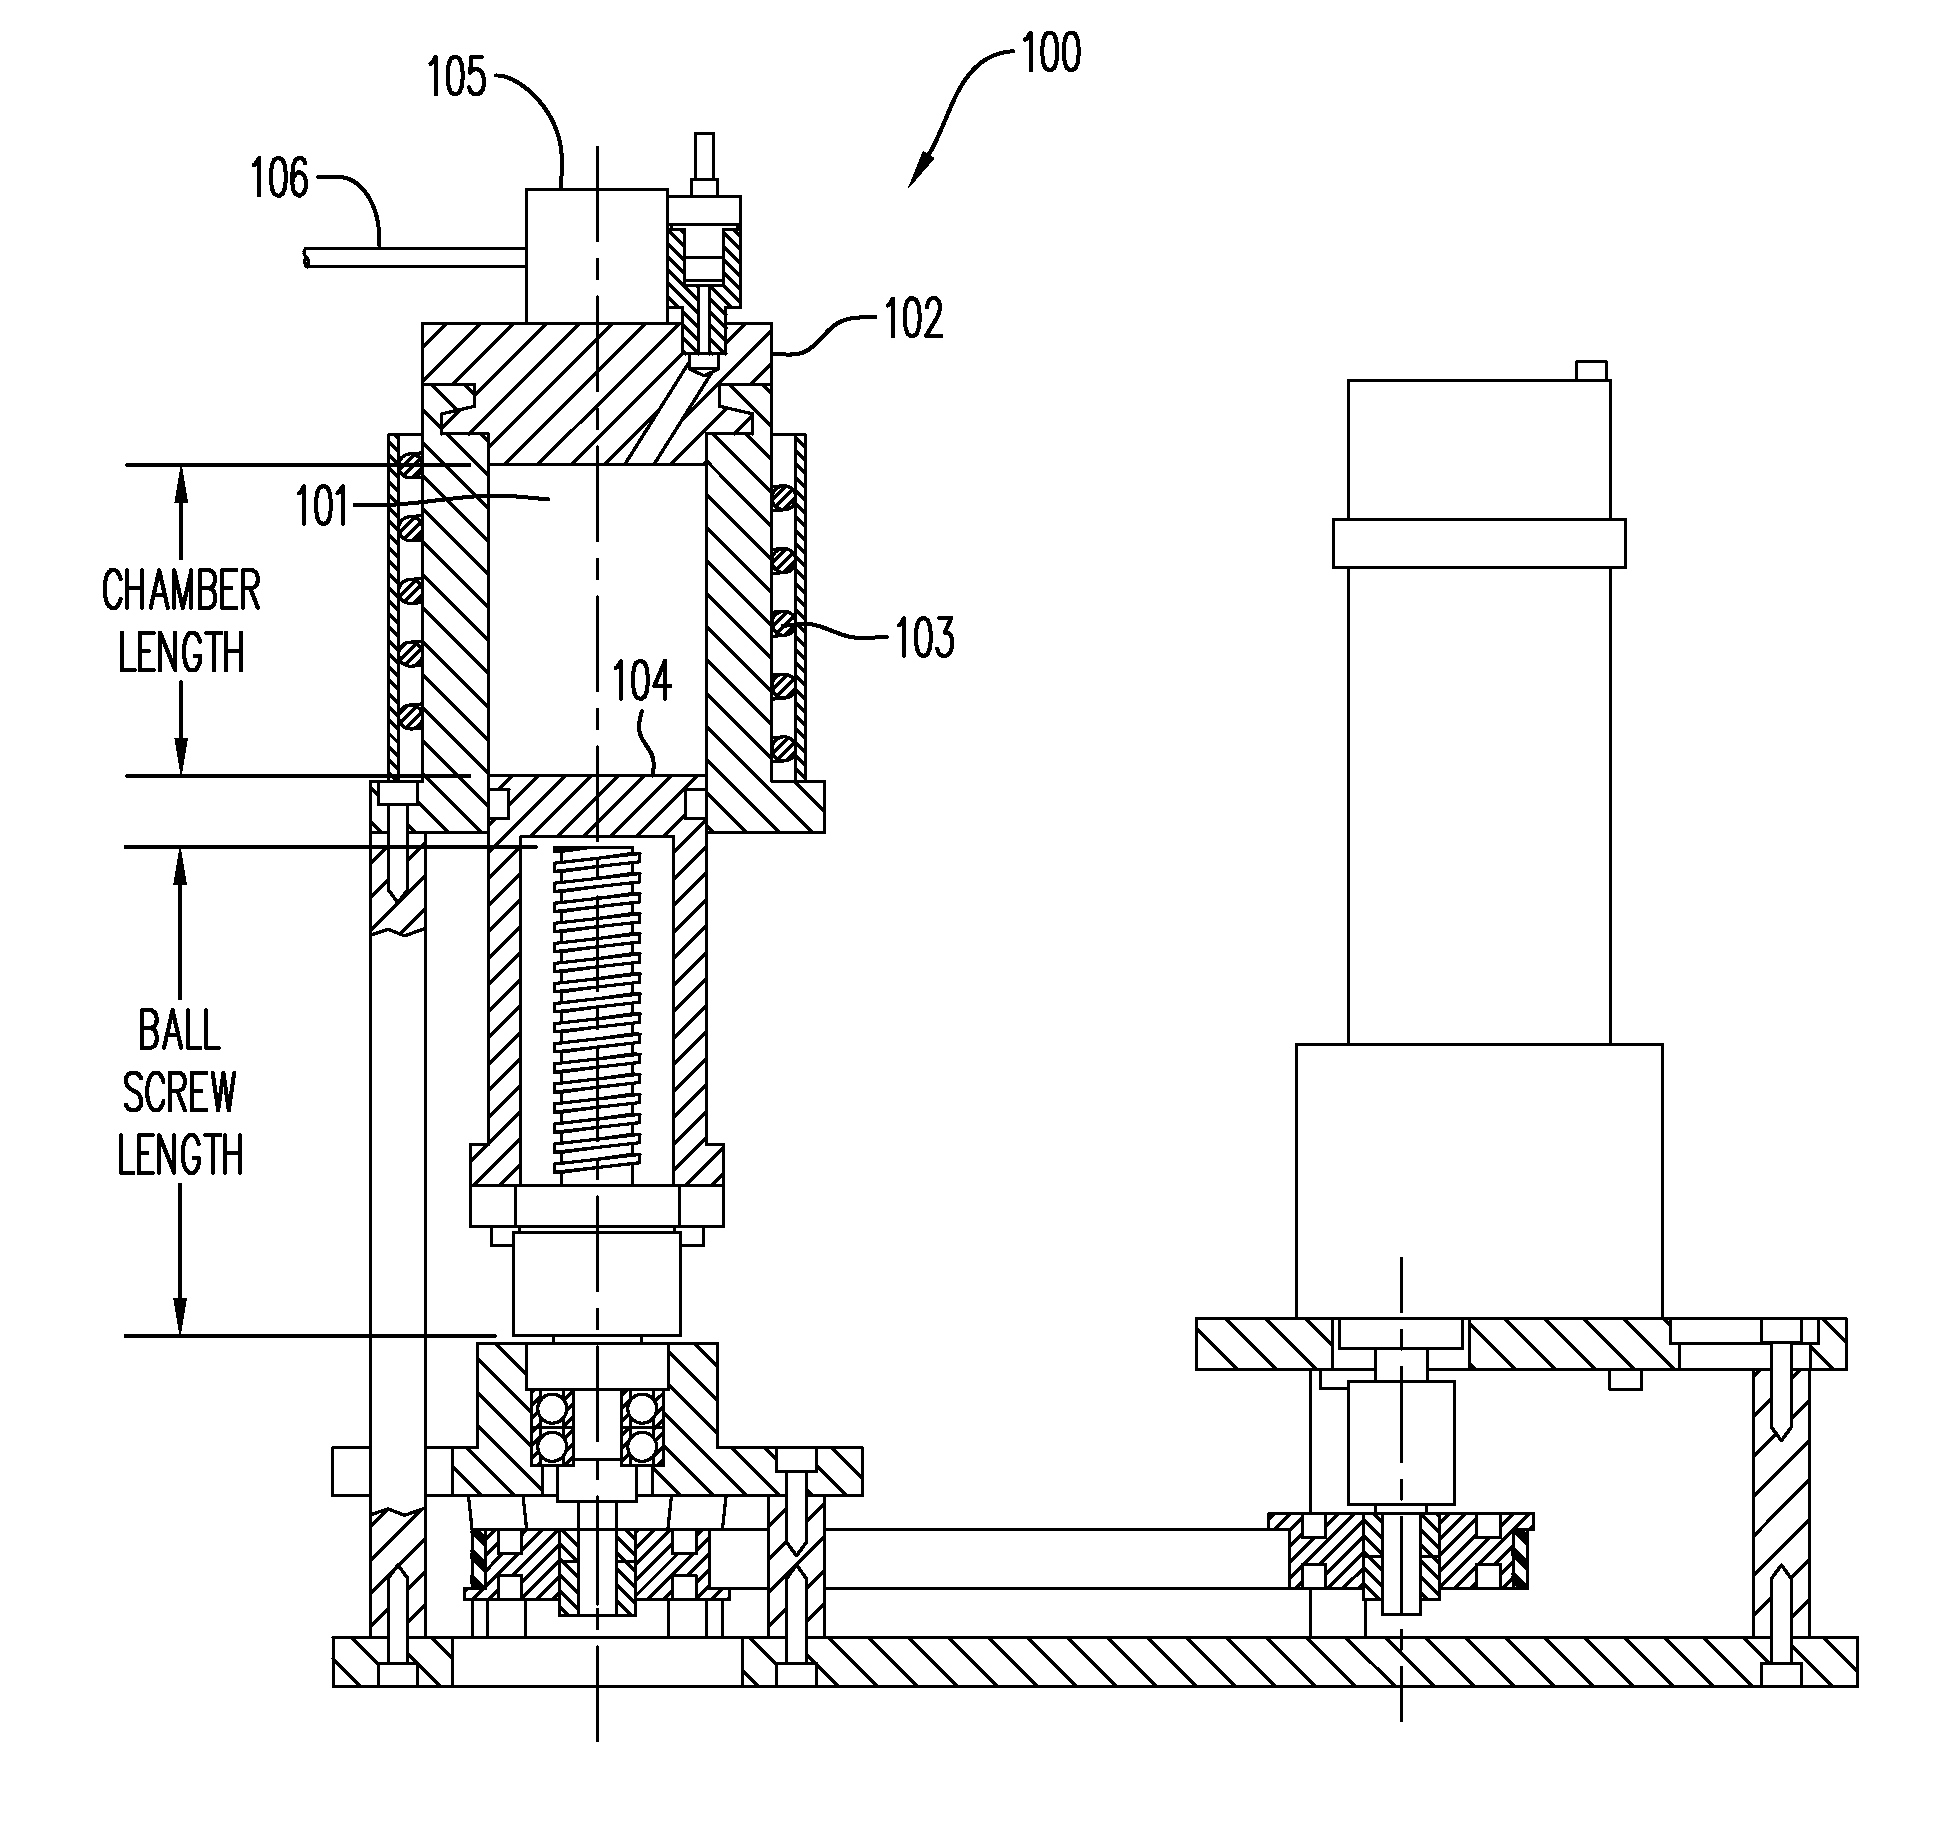 Cartridges for storing food materials and methods and apparatus for processing food materials stored within such cartridges